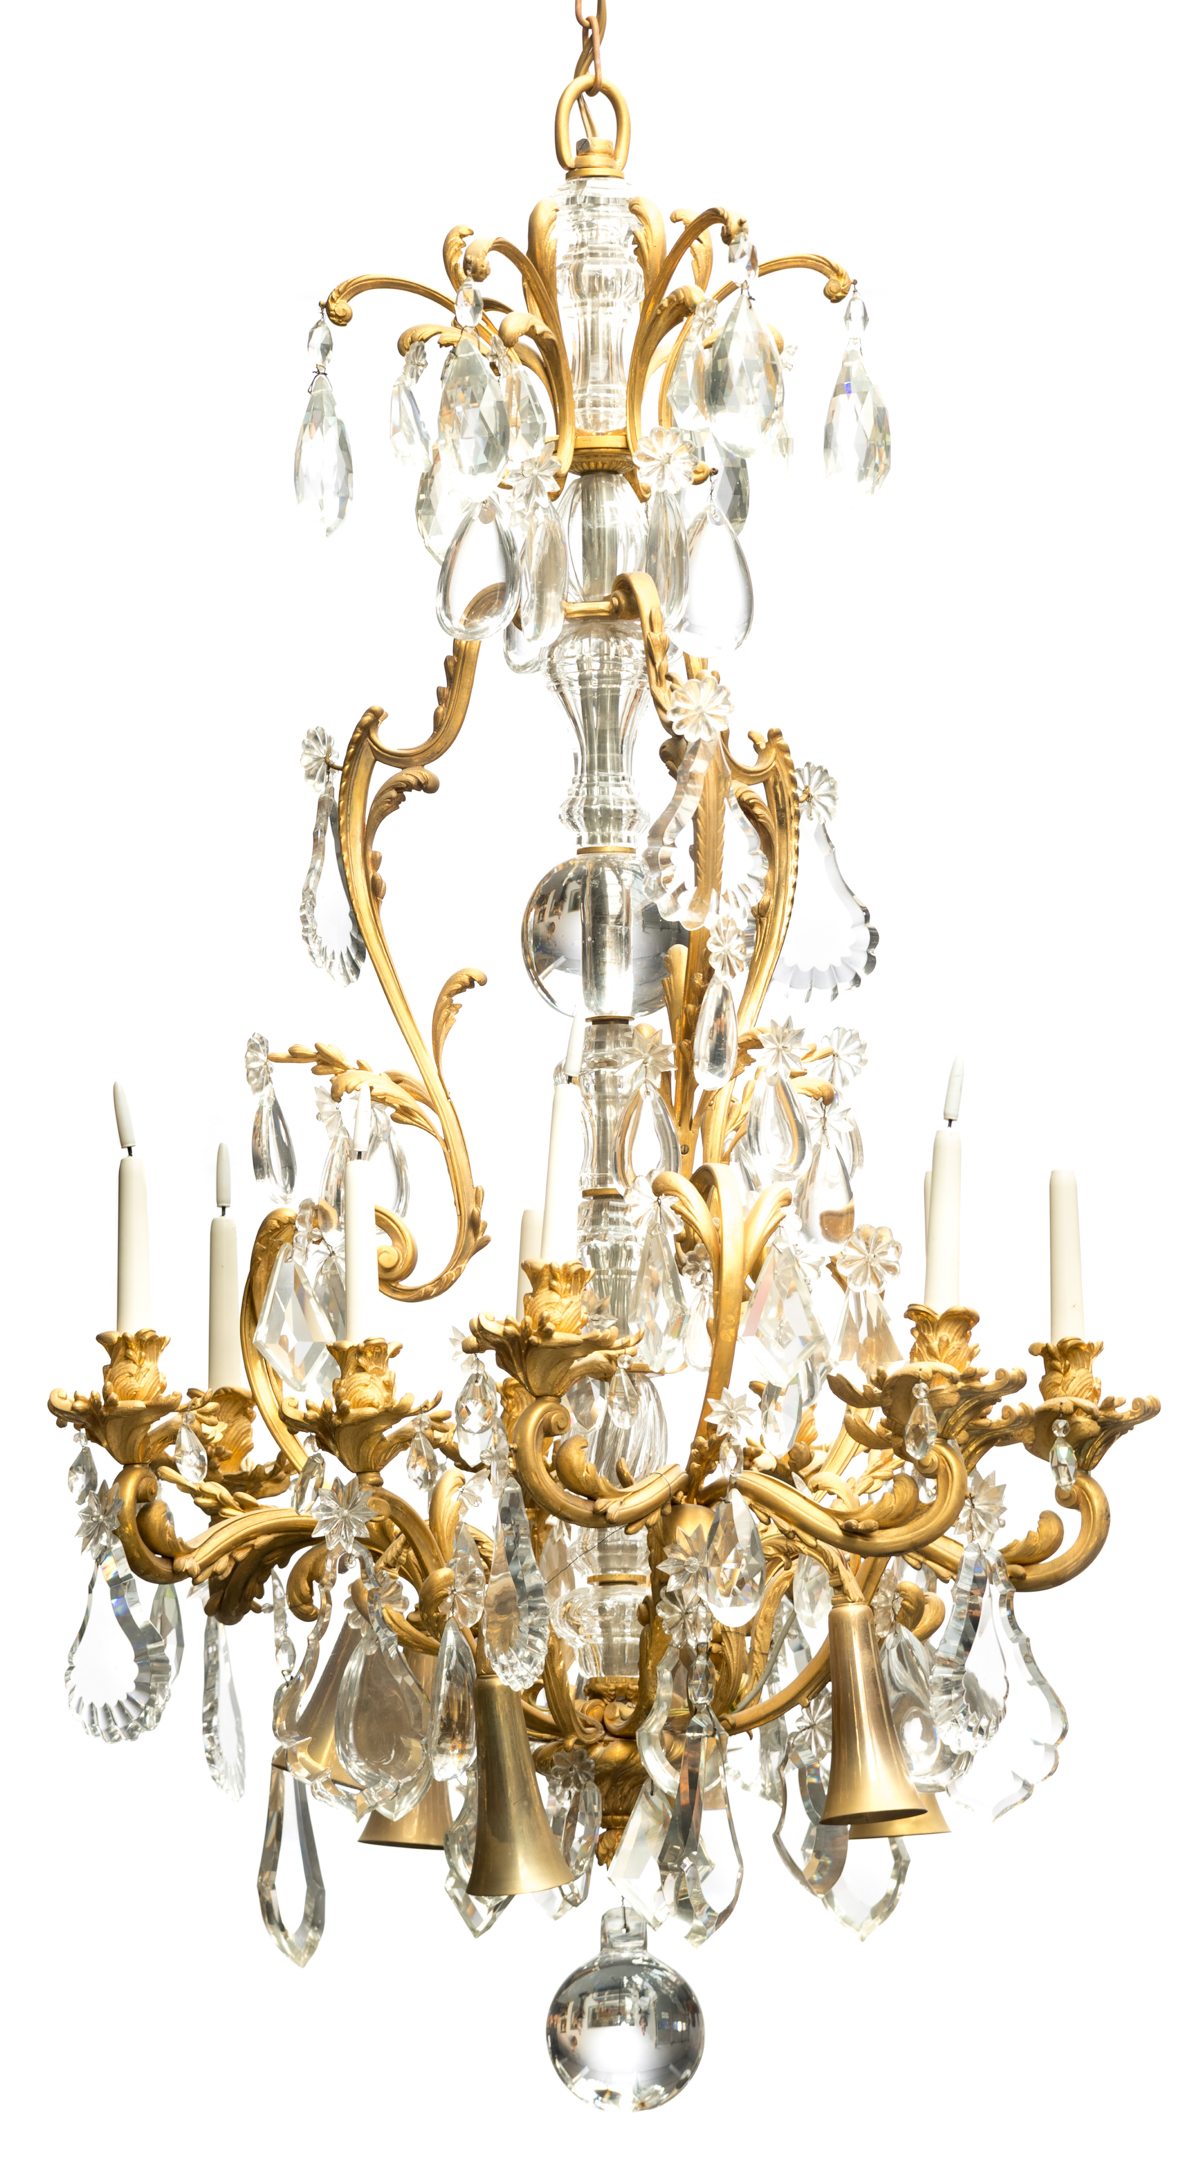 A gilt bronze chandelier embellished with crystal beads and drops, H 135 - ø 60 cm